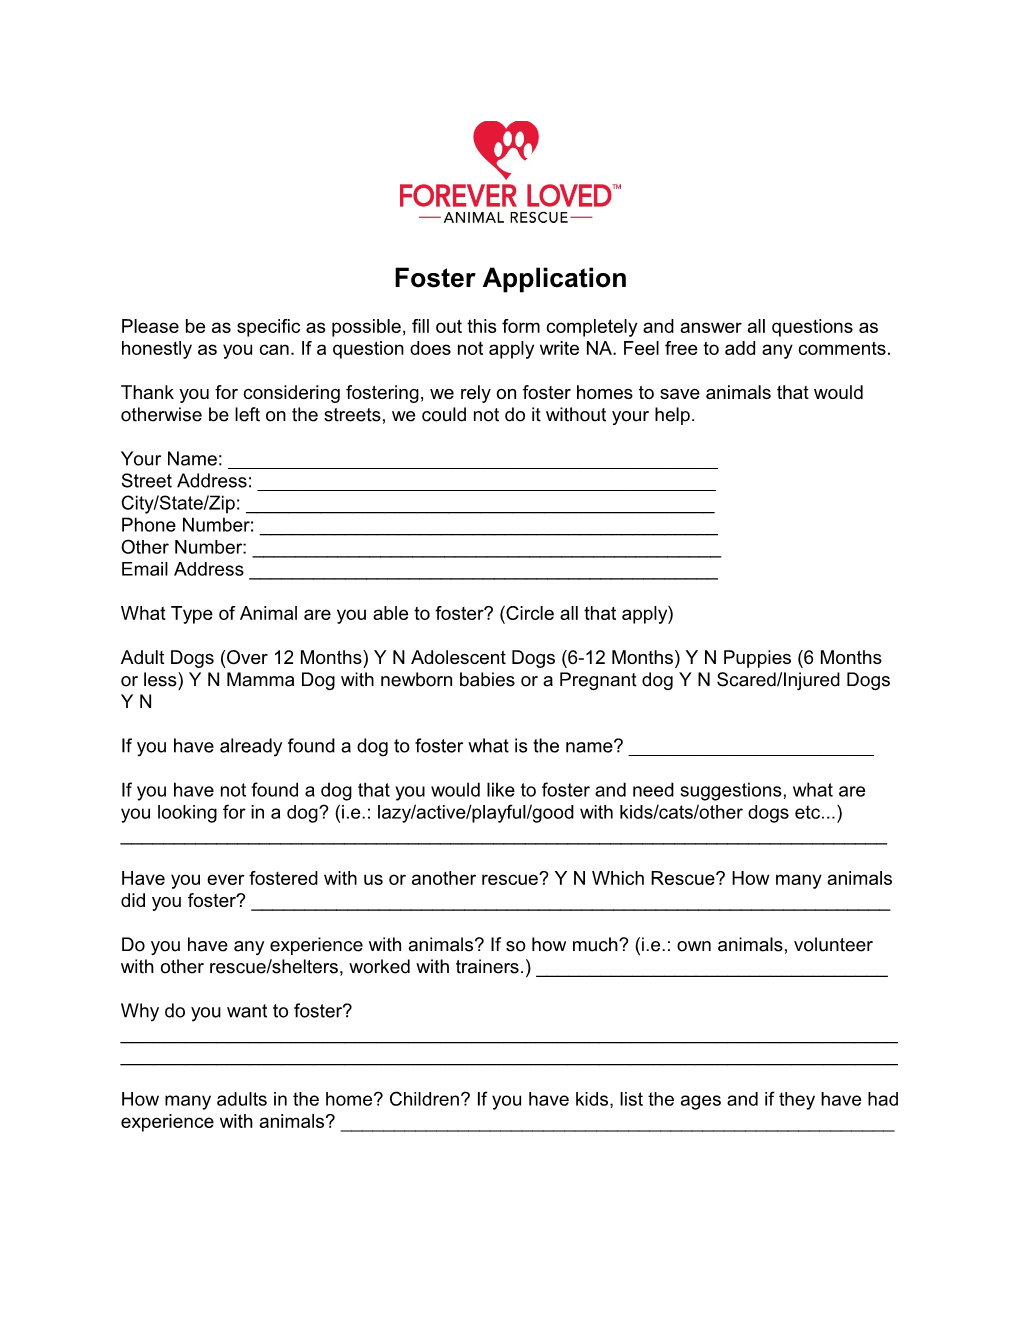 Foster Application